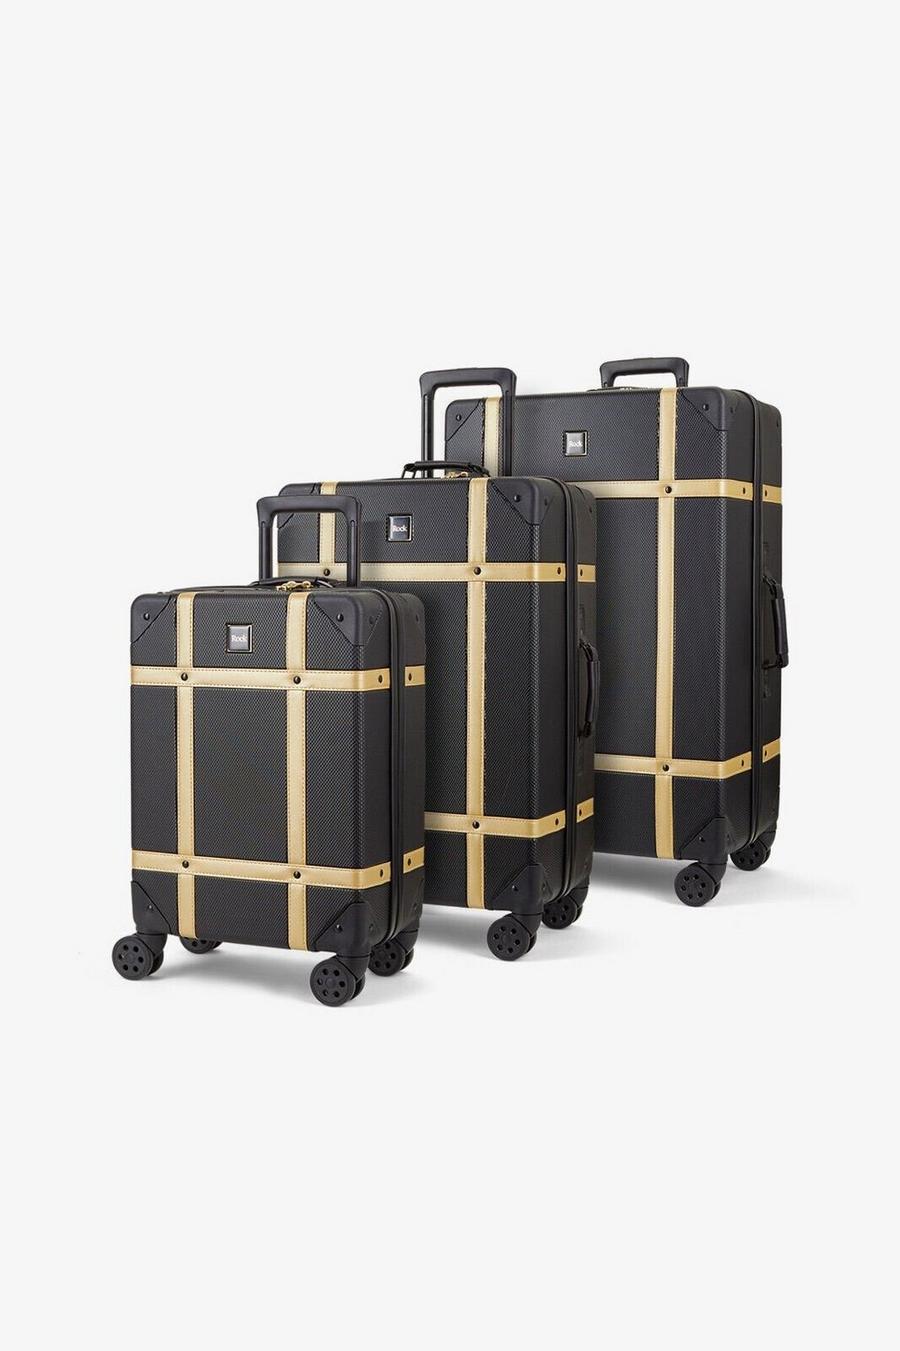 Gold Vintage Hard Shell Luggage Suitcase Trunk Cabin Travel Bags Set Of 3